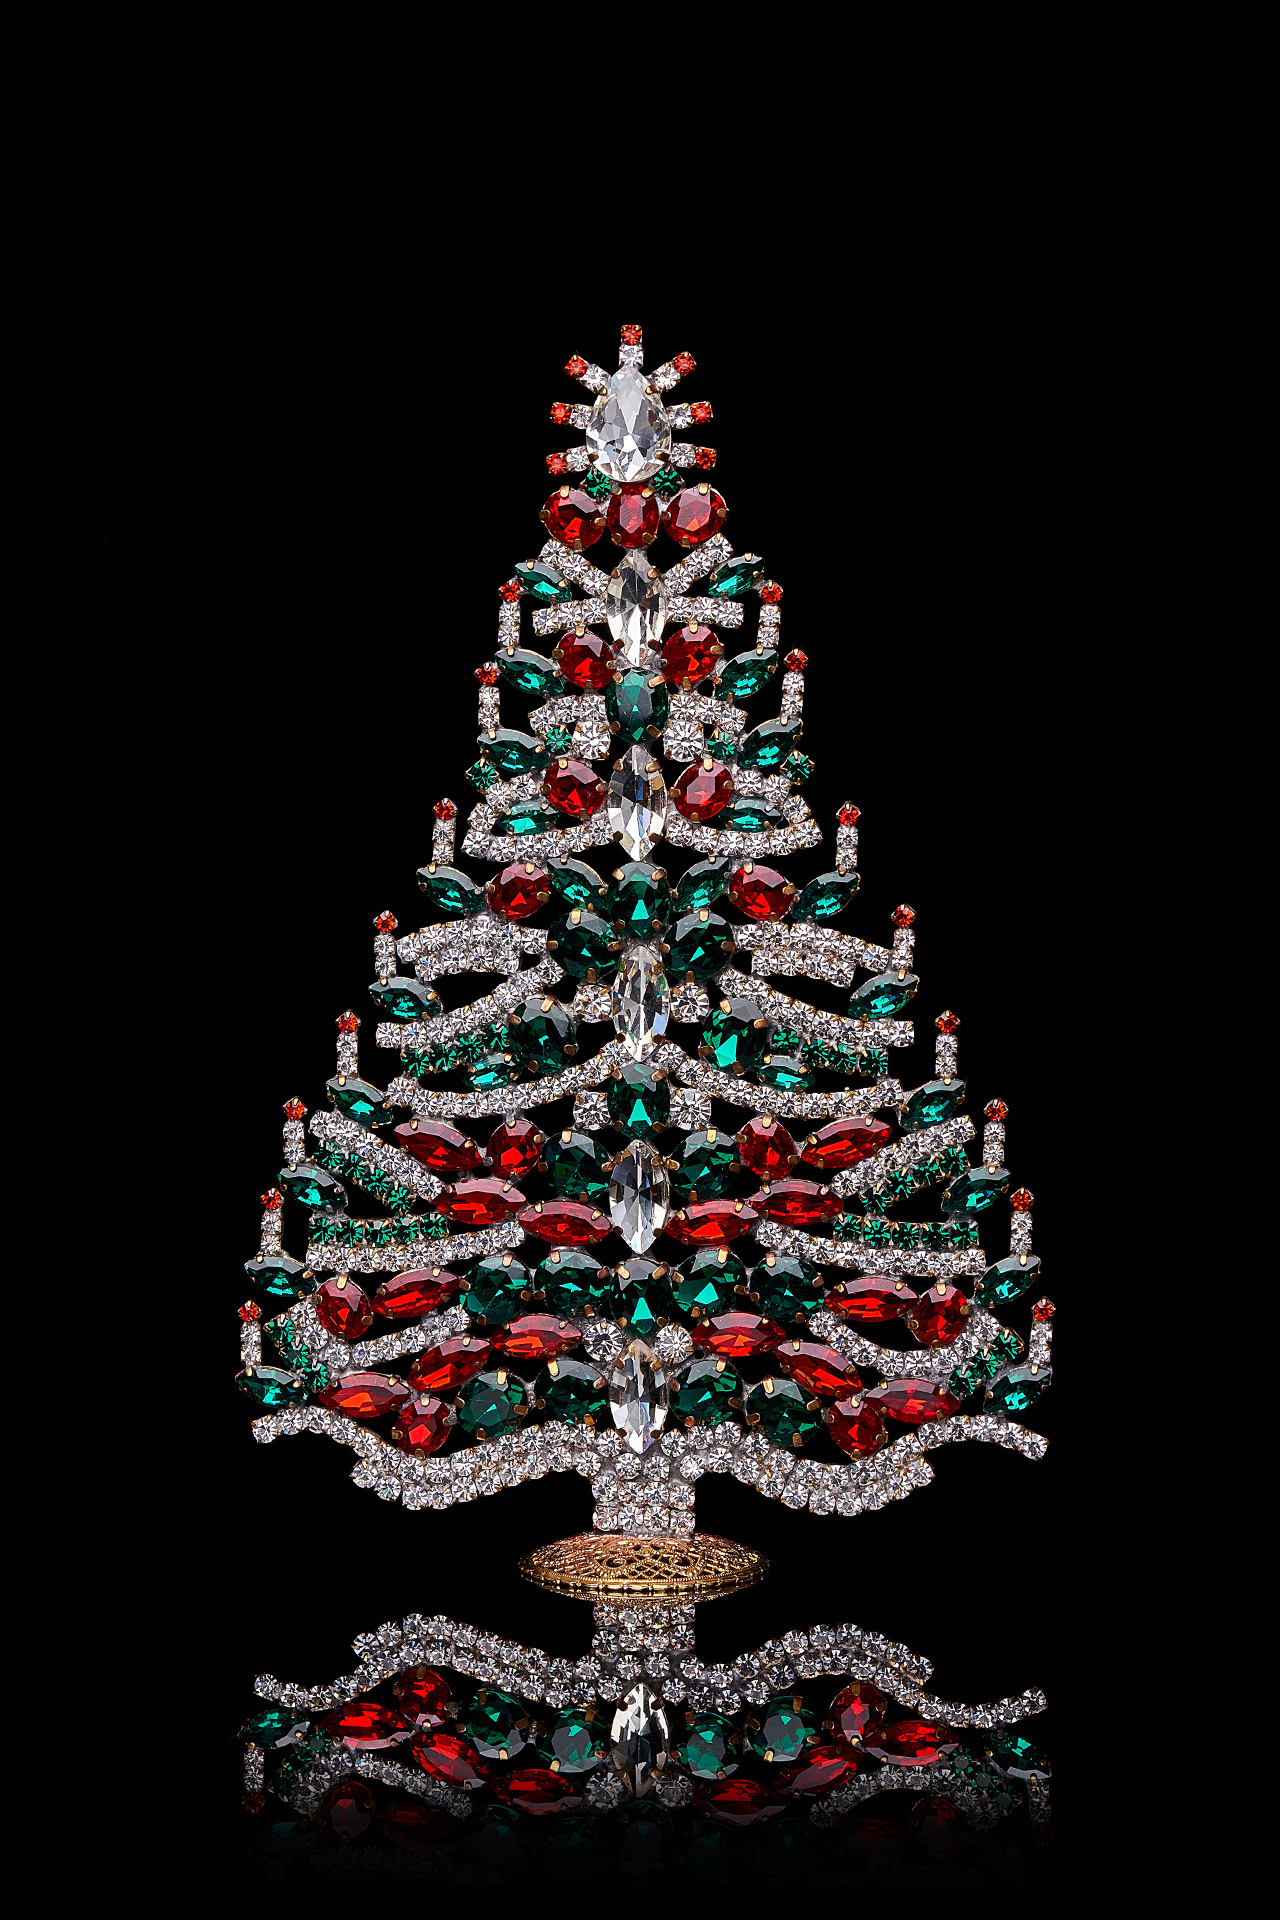 Handmade tabletop Christmas tree with festive colours crystals